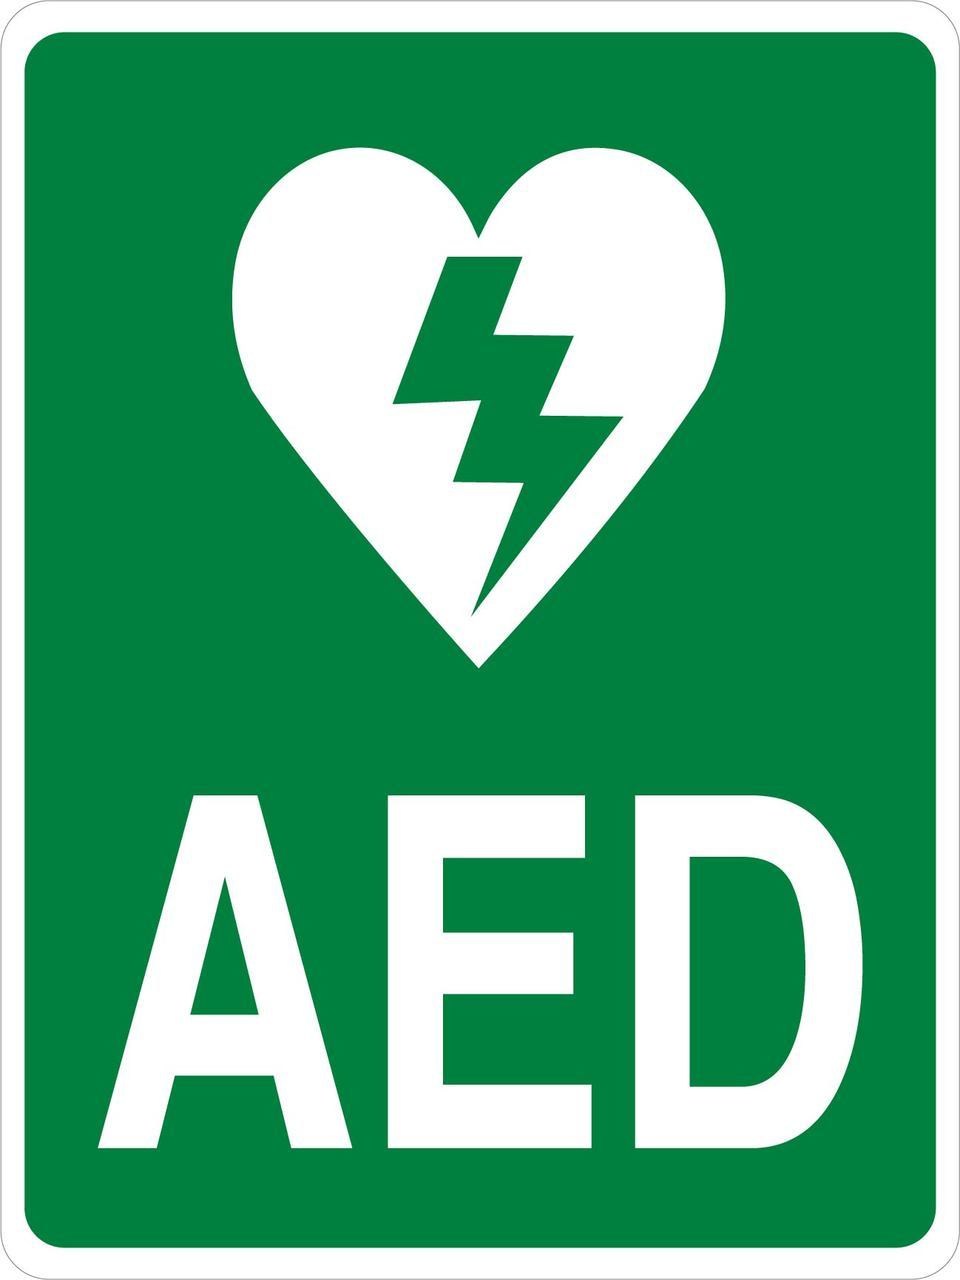 aed-wall-sign-green-vertical-format-phs-safety